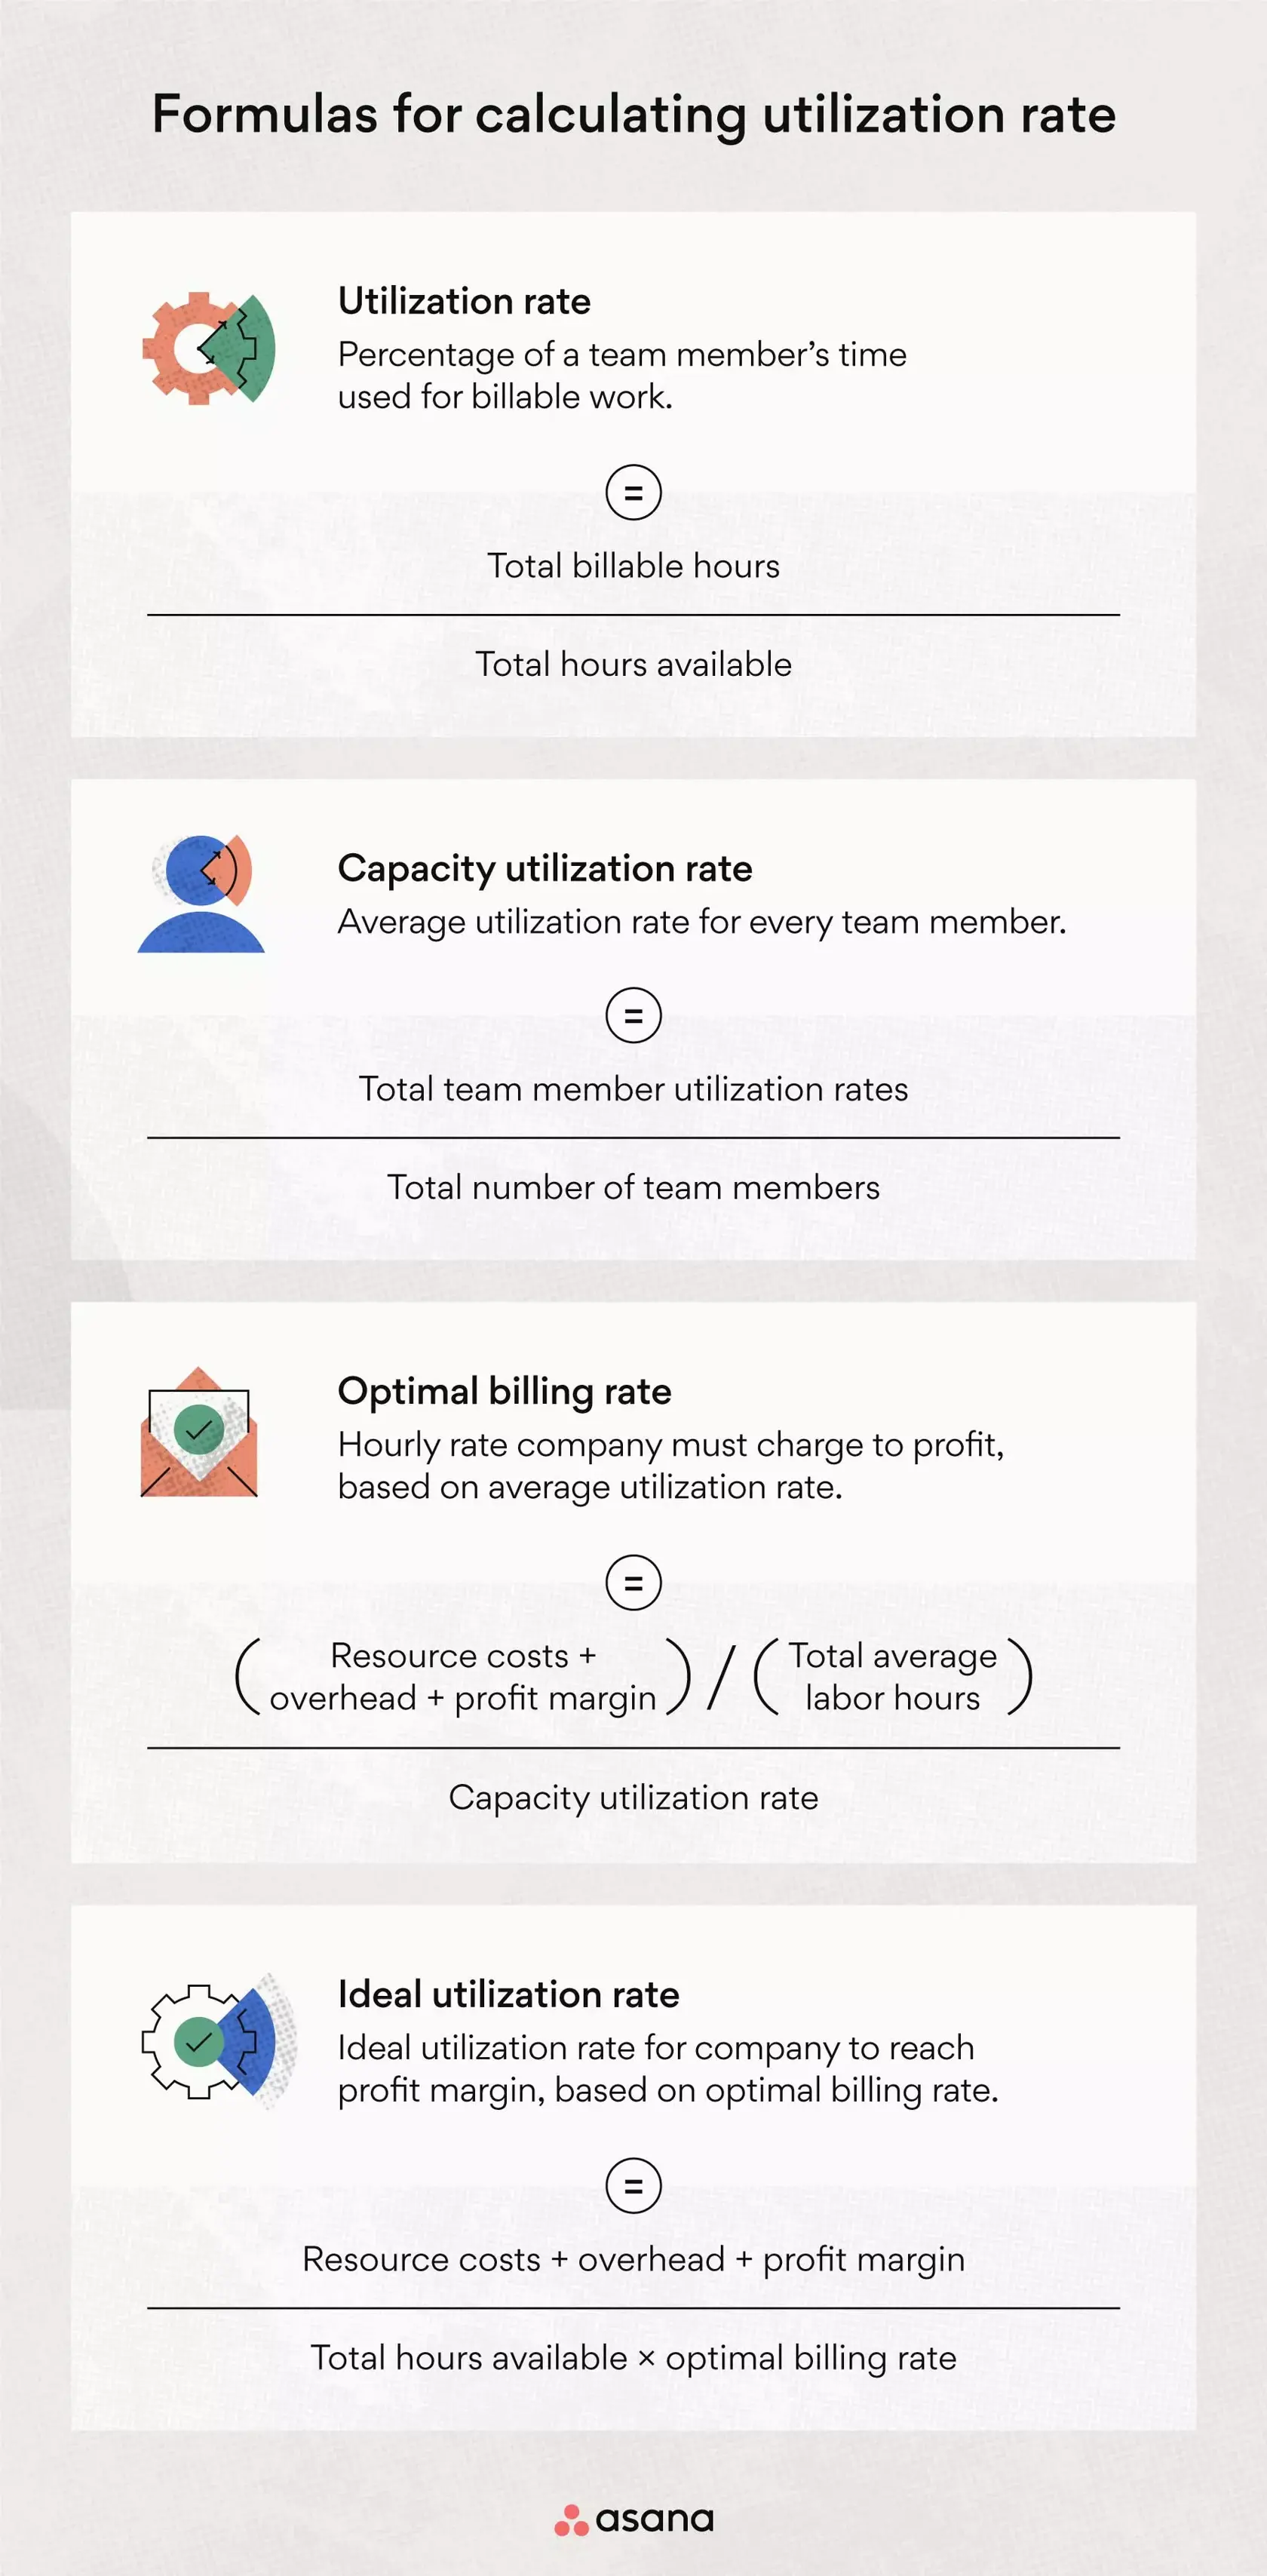 How to calculate utilization rate